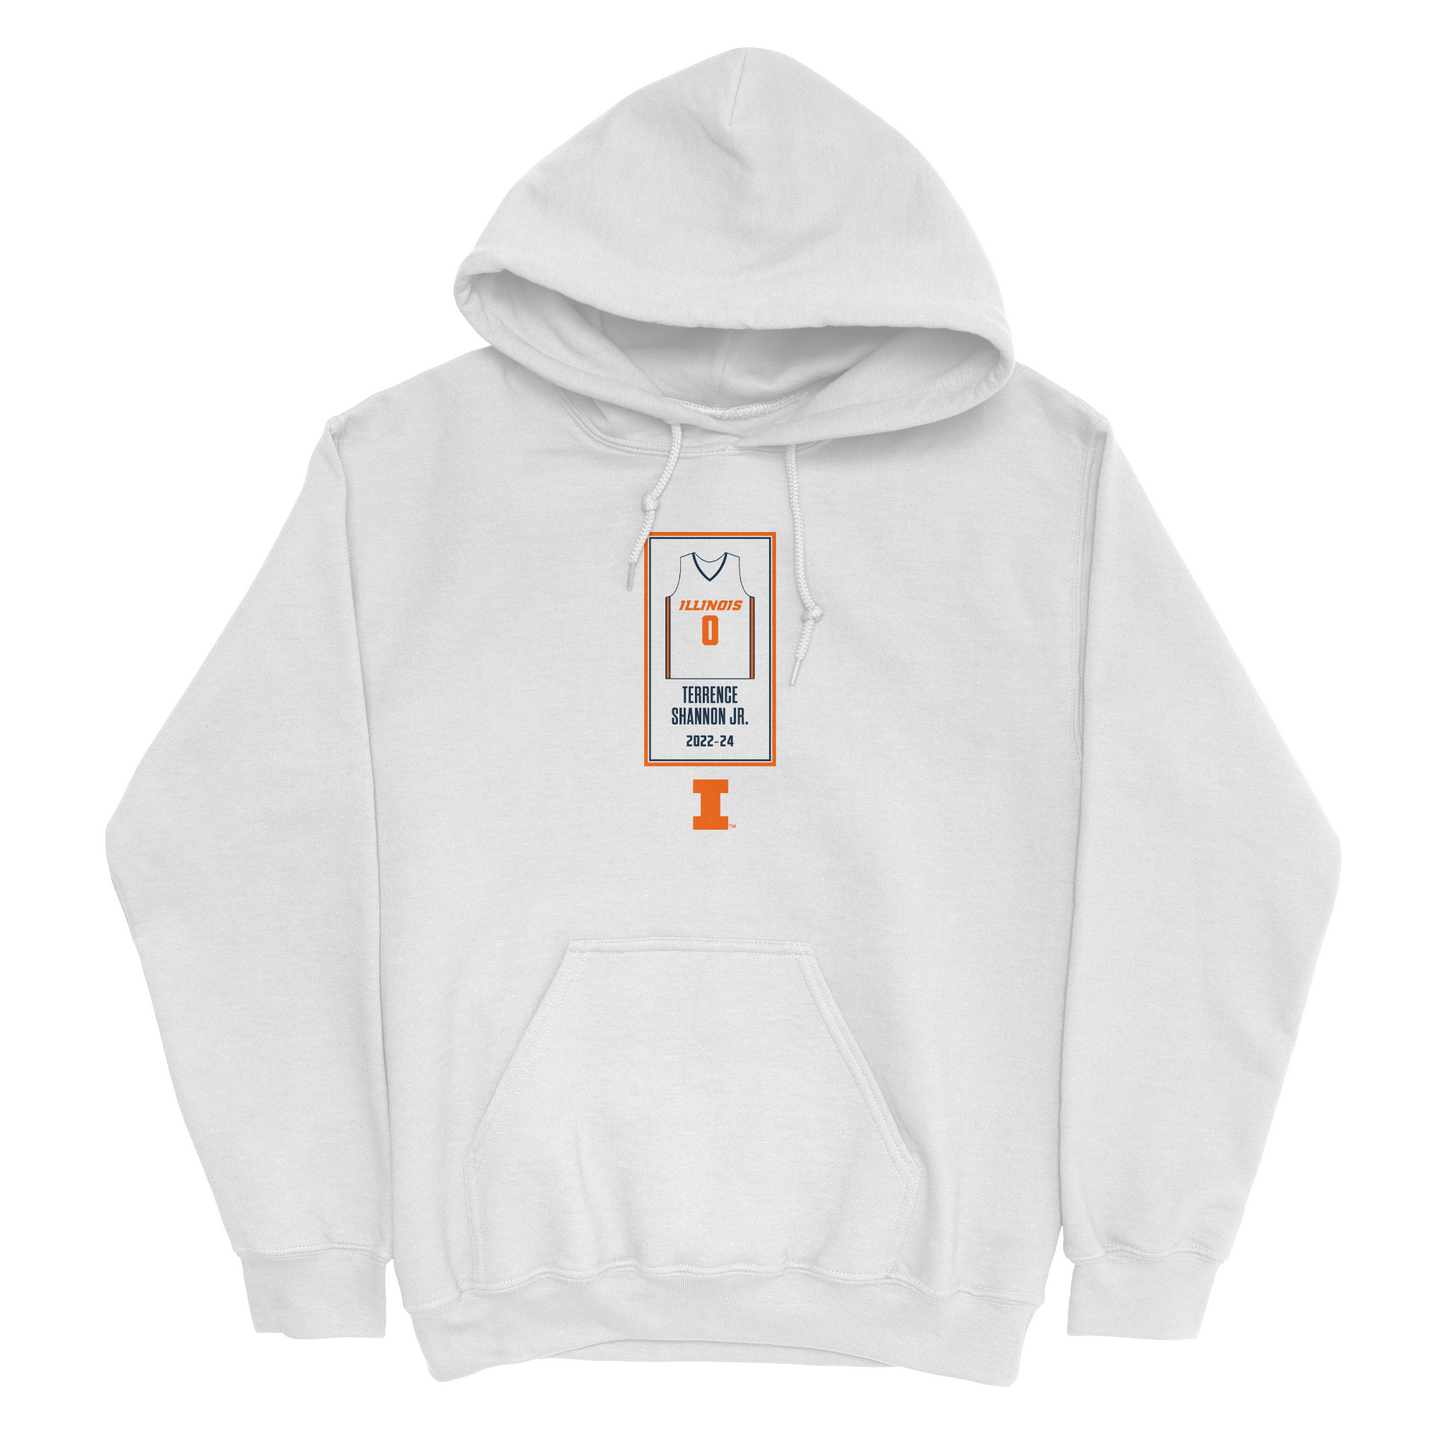 EXCLUSIVE RELEASE: Terrence Shannon Jr. Rafters Hoodie